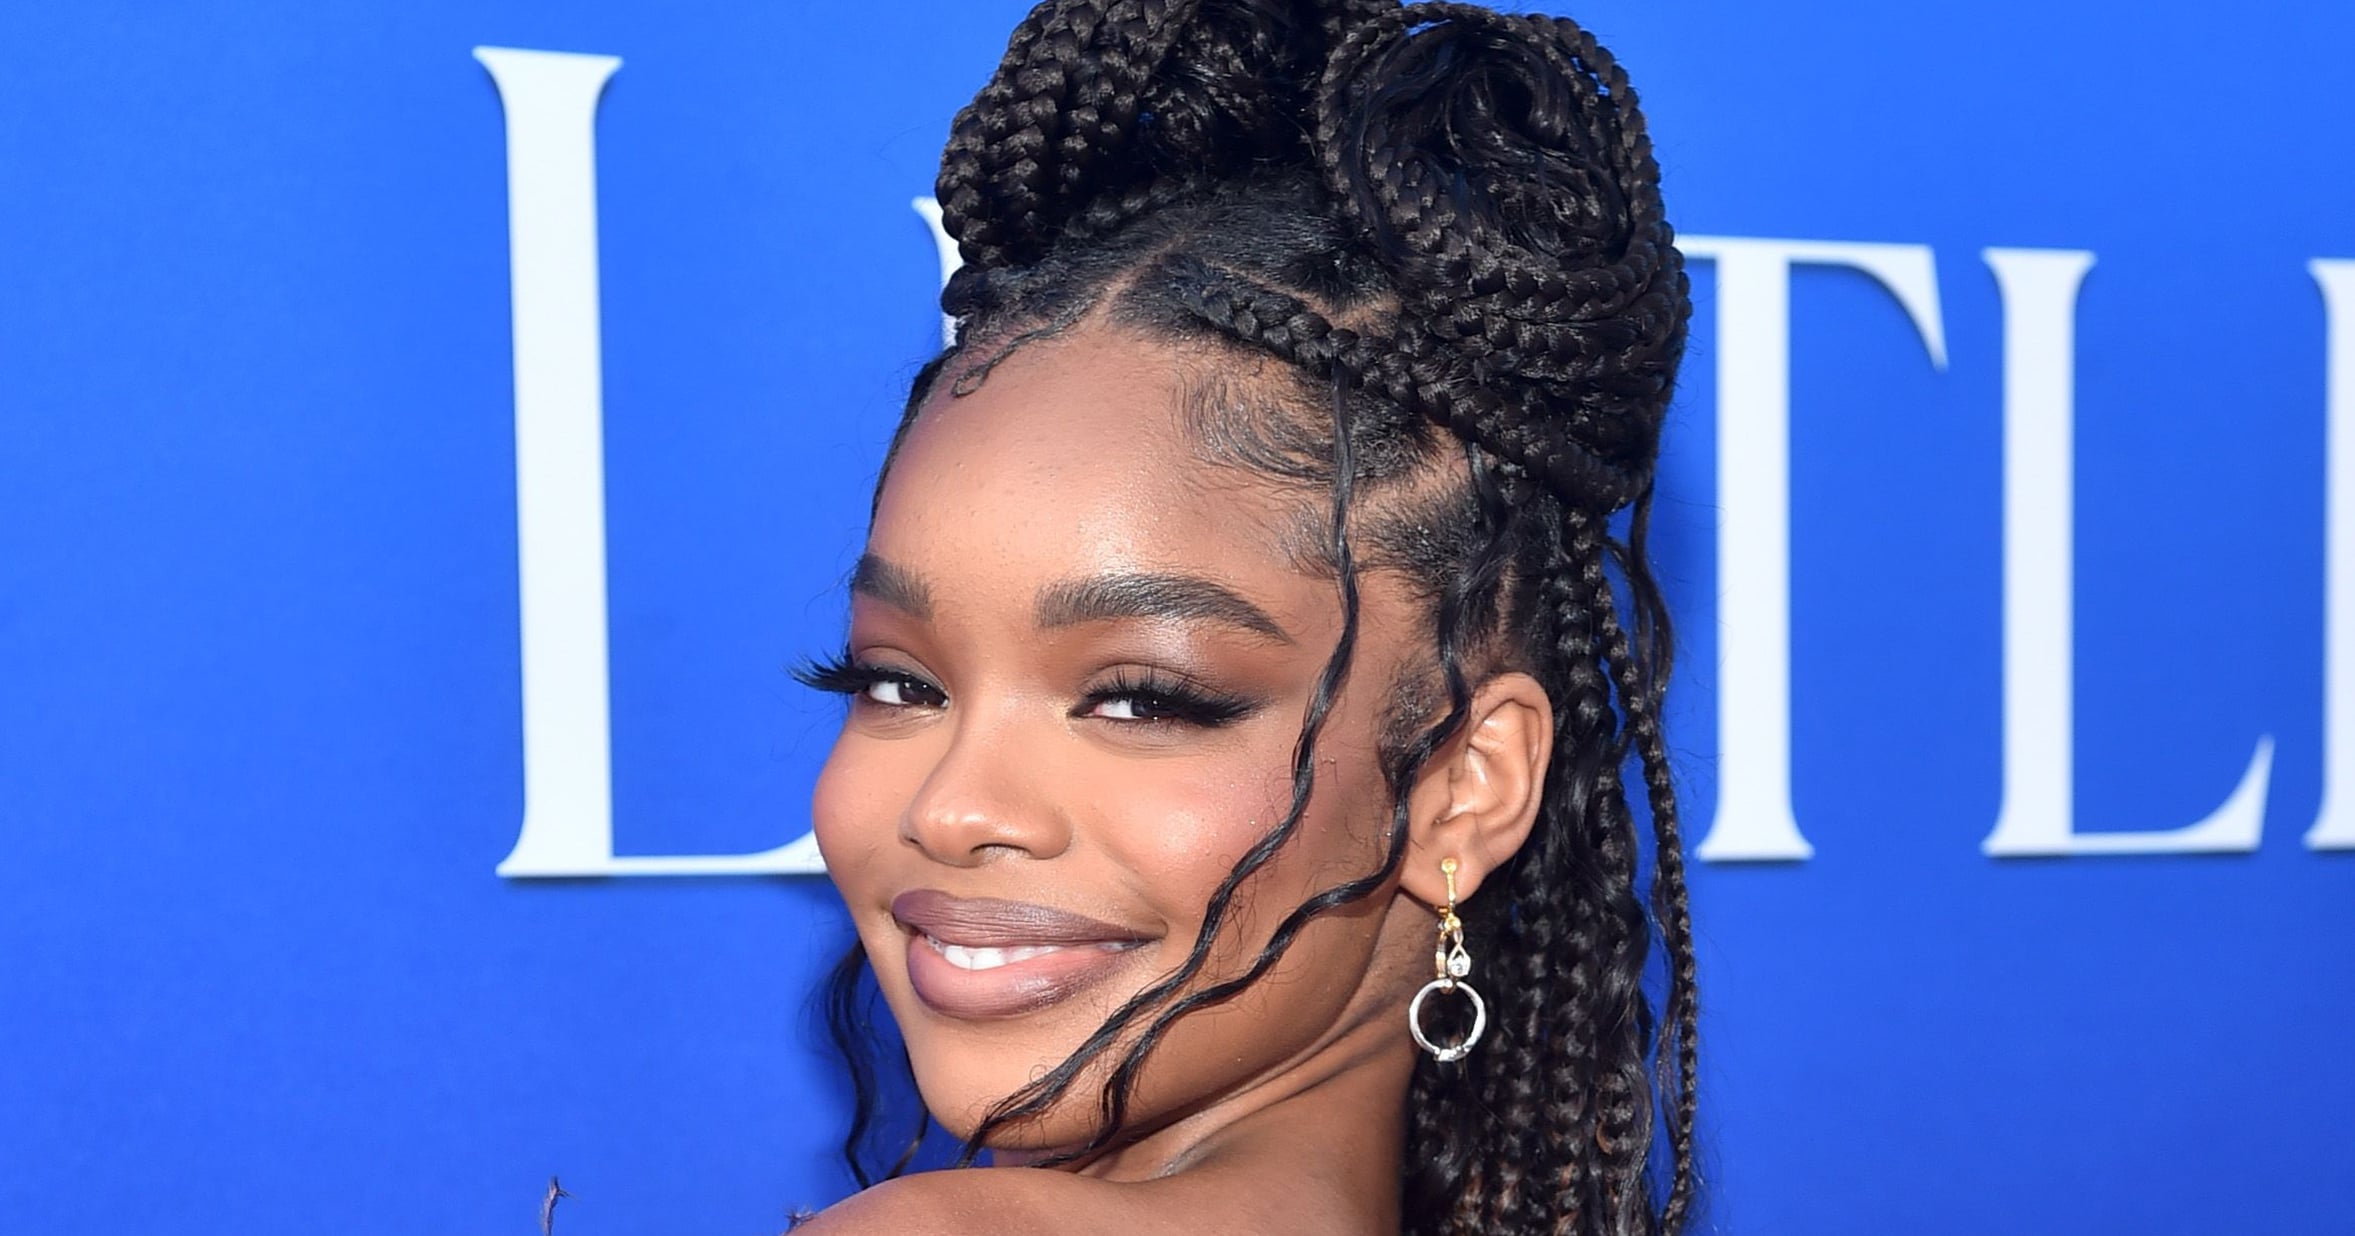 Marsai Martin Debuts Gorgeous Red Hair Color on Instagram: “Reset”